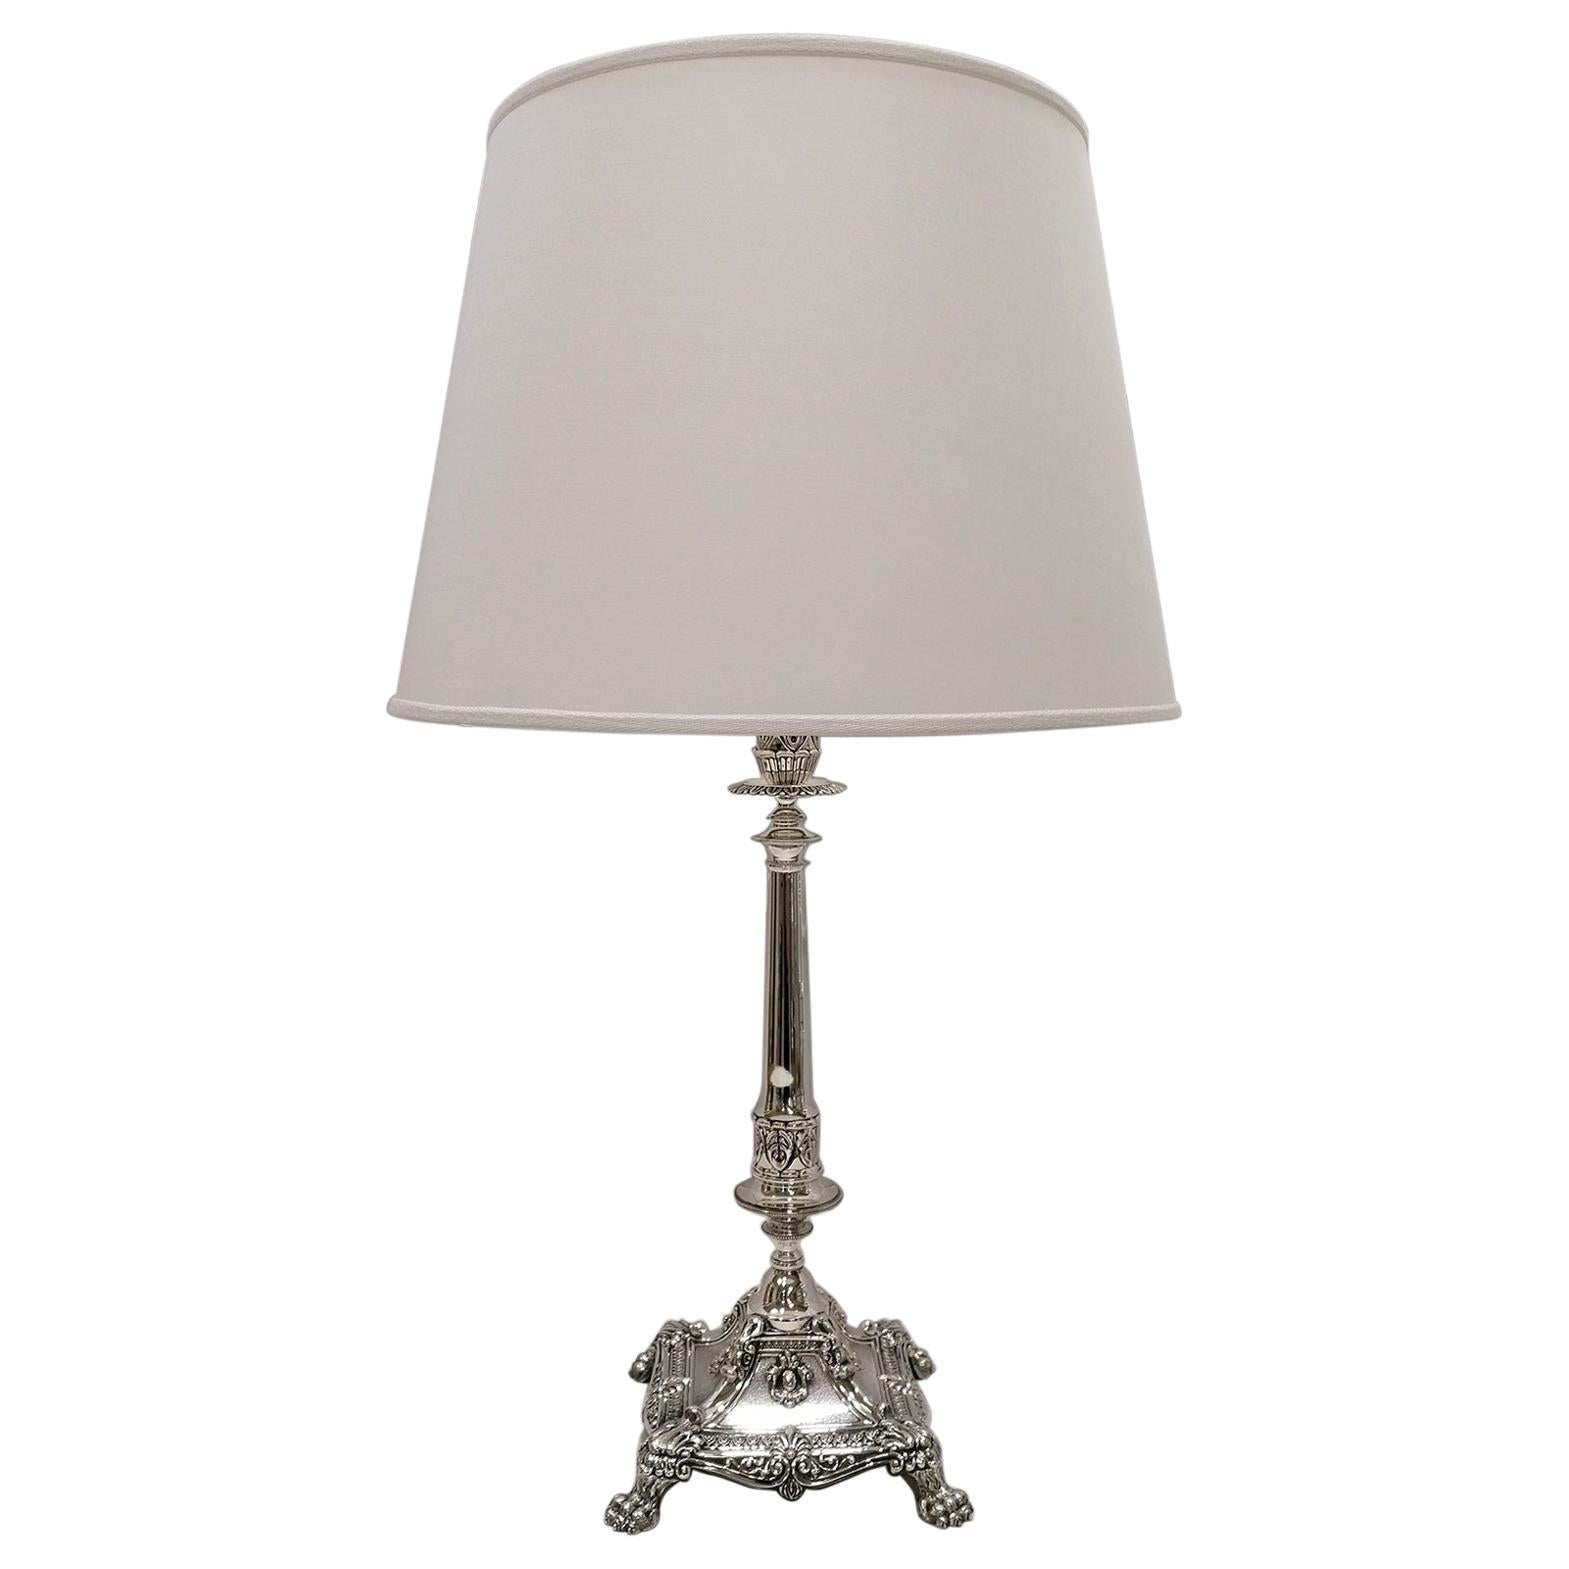 20th Century Italian Solid Silver 800 Table Lamp, Empire Style